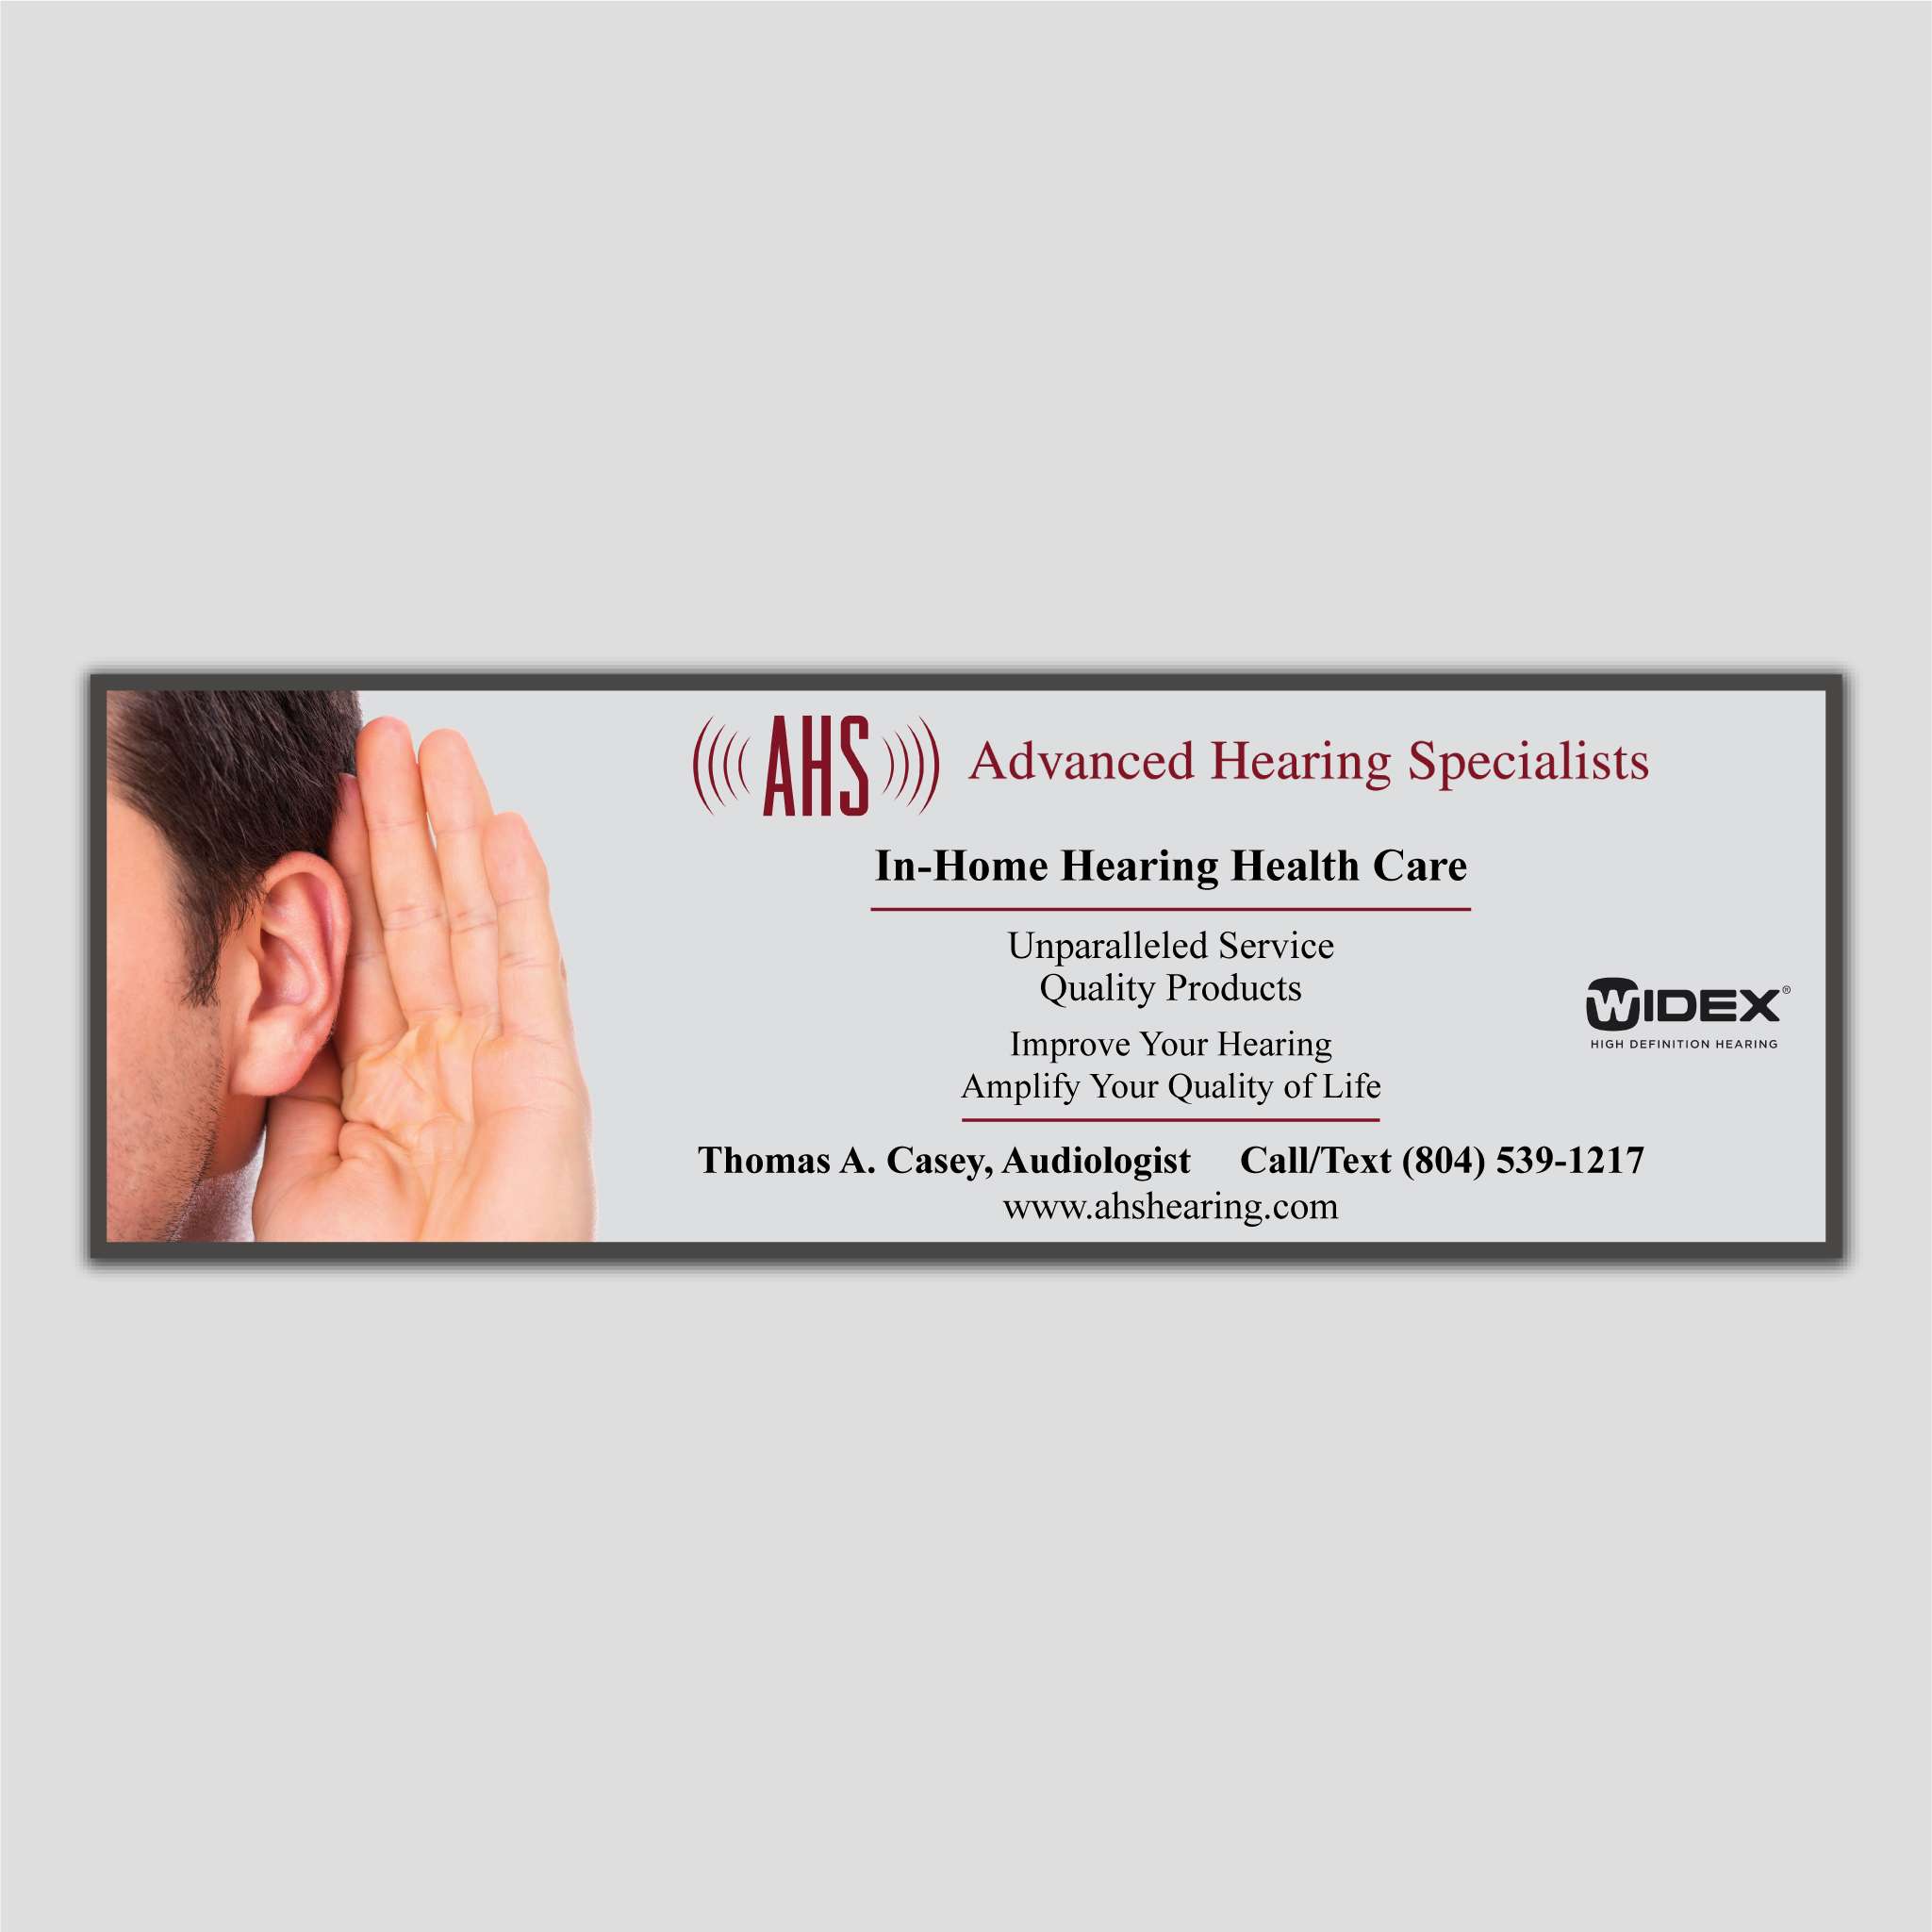 Advanced Hearing Specialists - ad